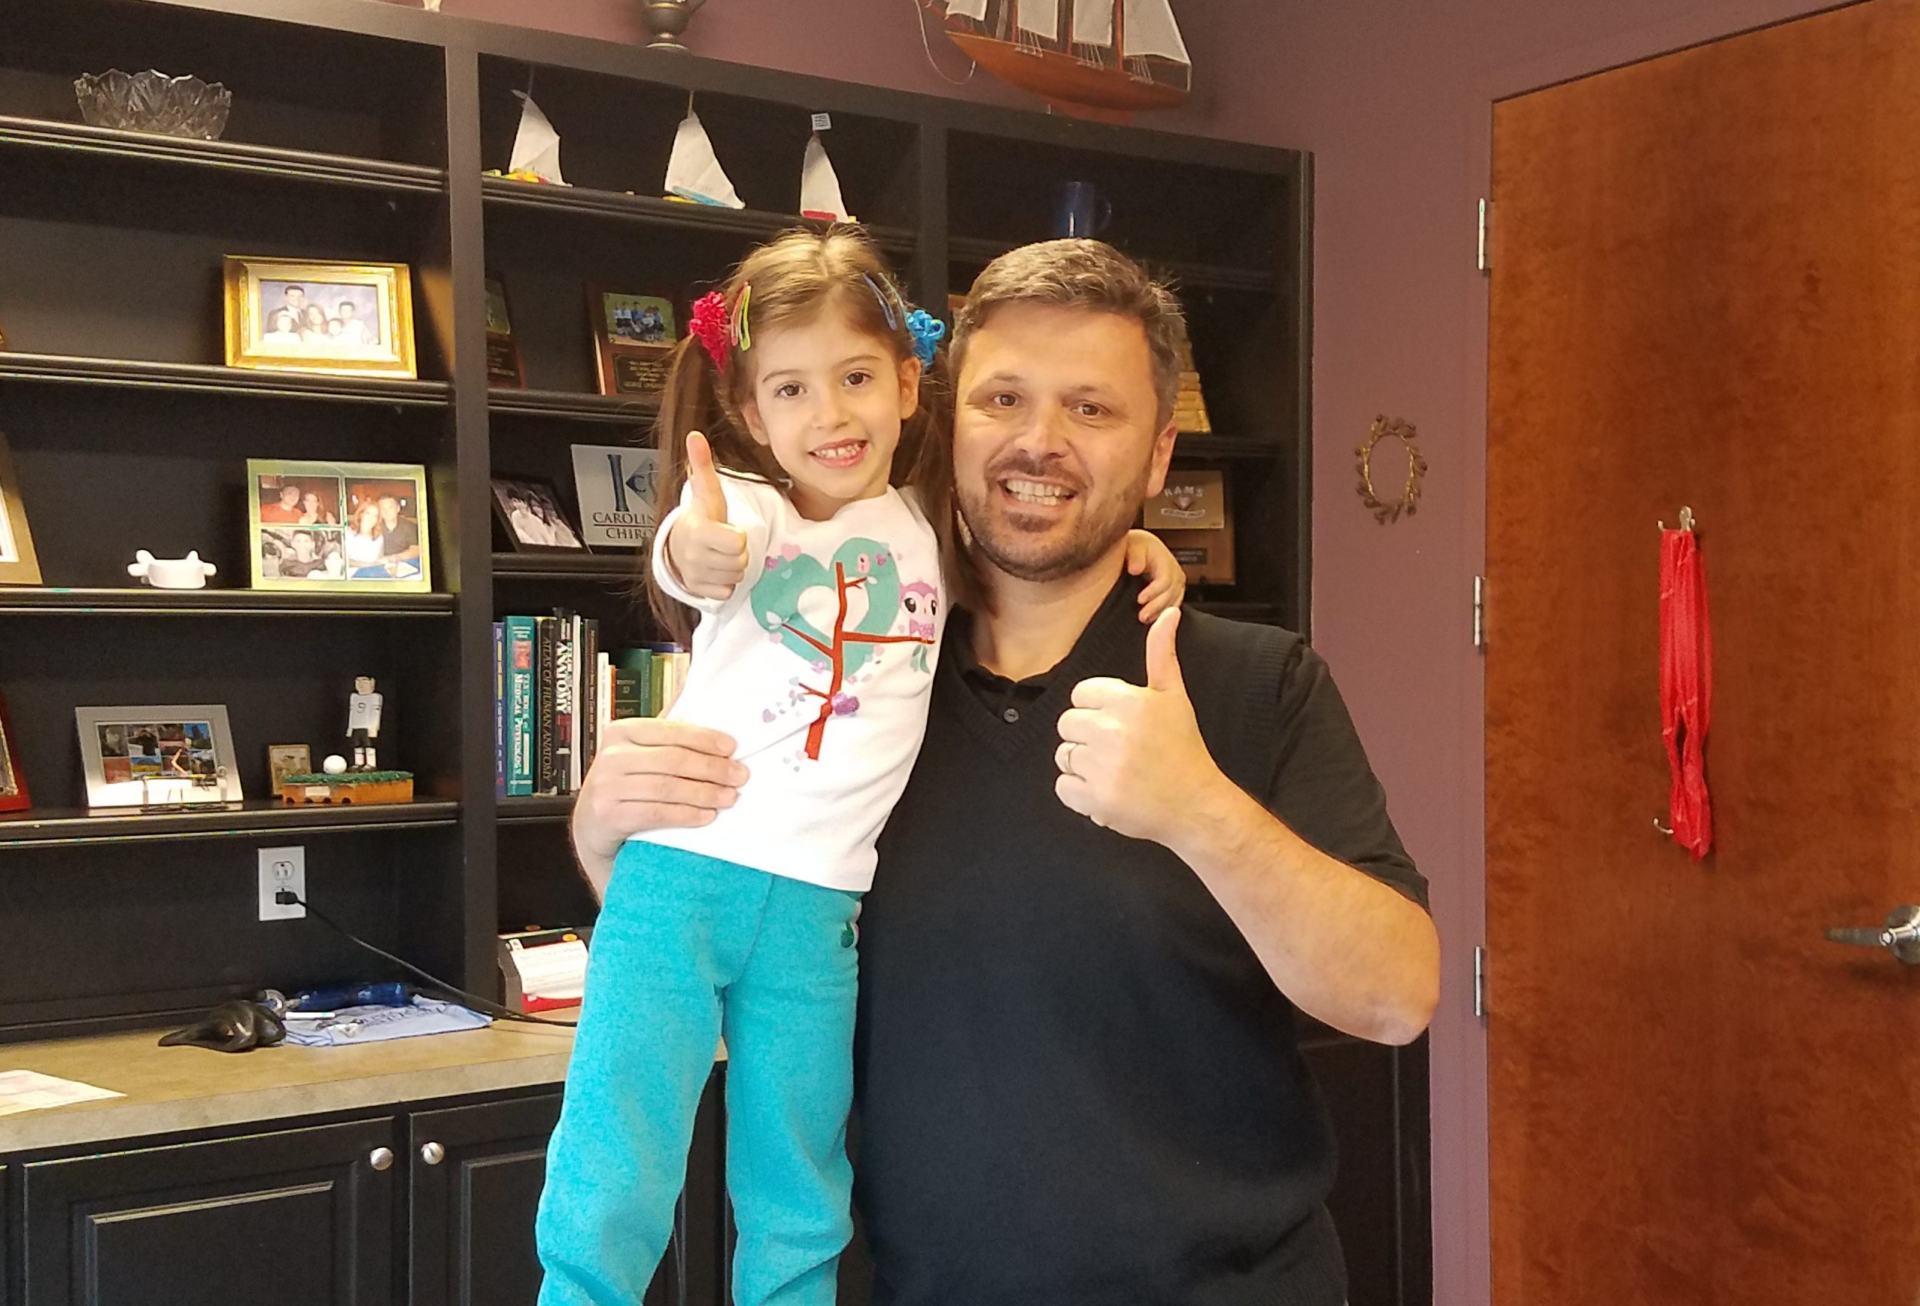 Dr. George Limbanovnos with a patient showing a thumbs up sign